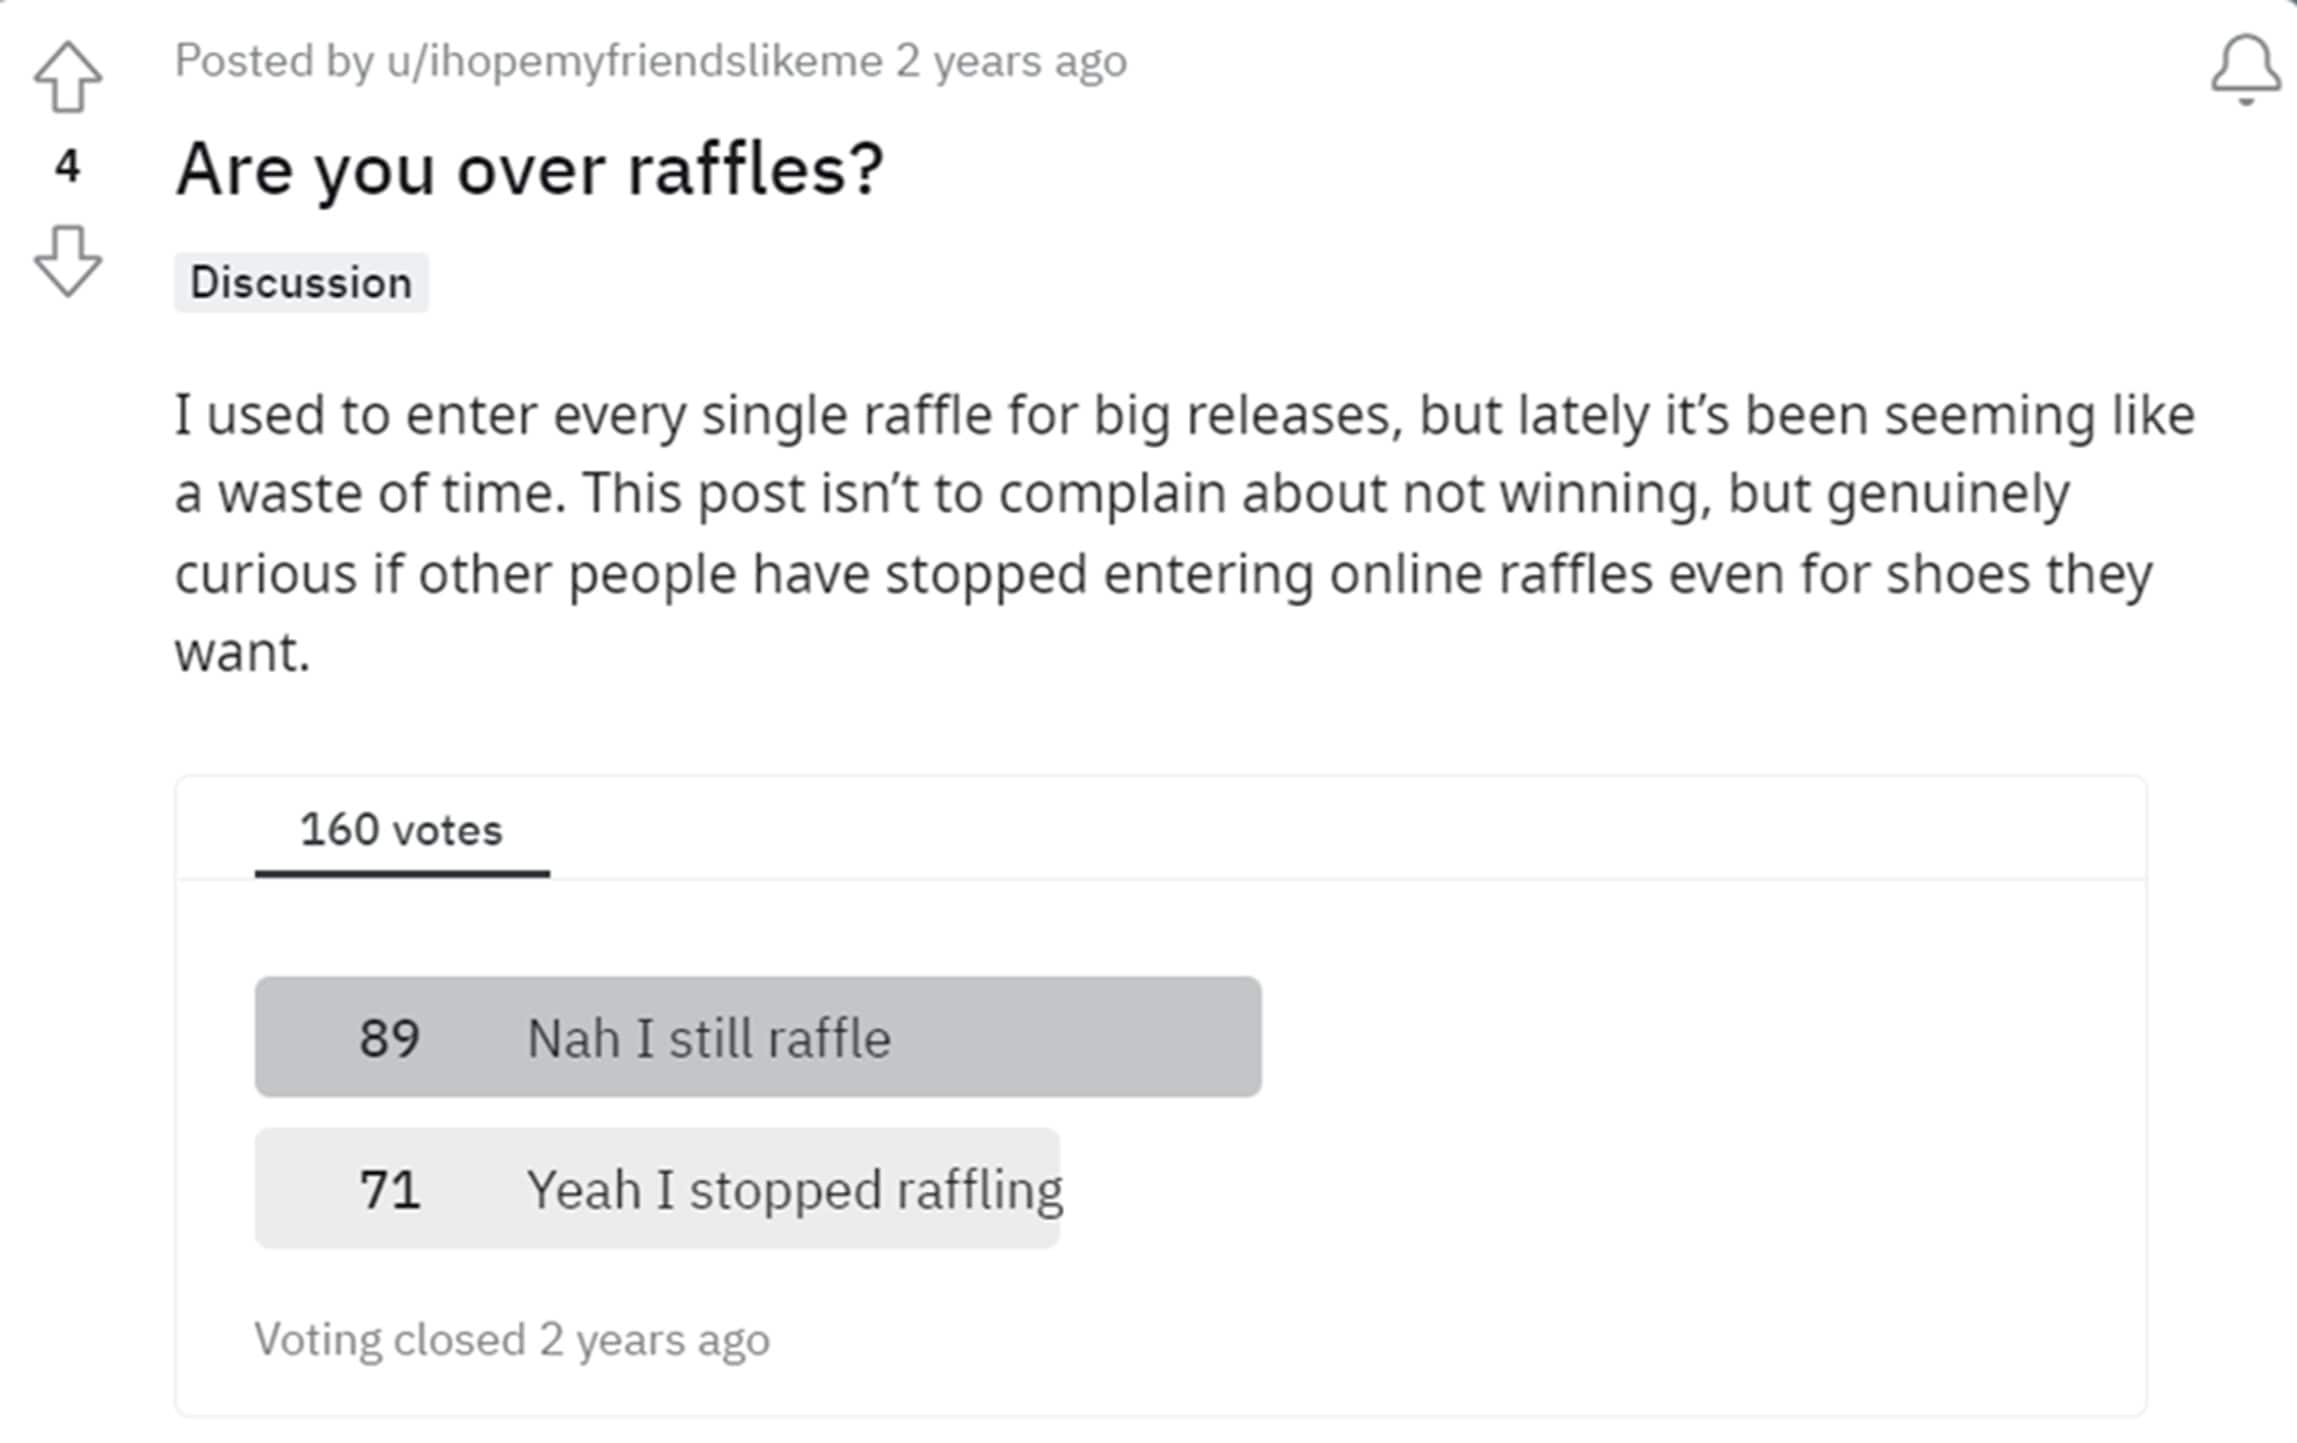 Reddit poll that asks "Are you over sneaker raffles" with 45% of people saying they stopped raffling